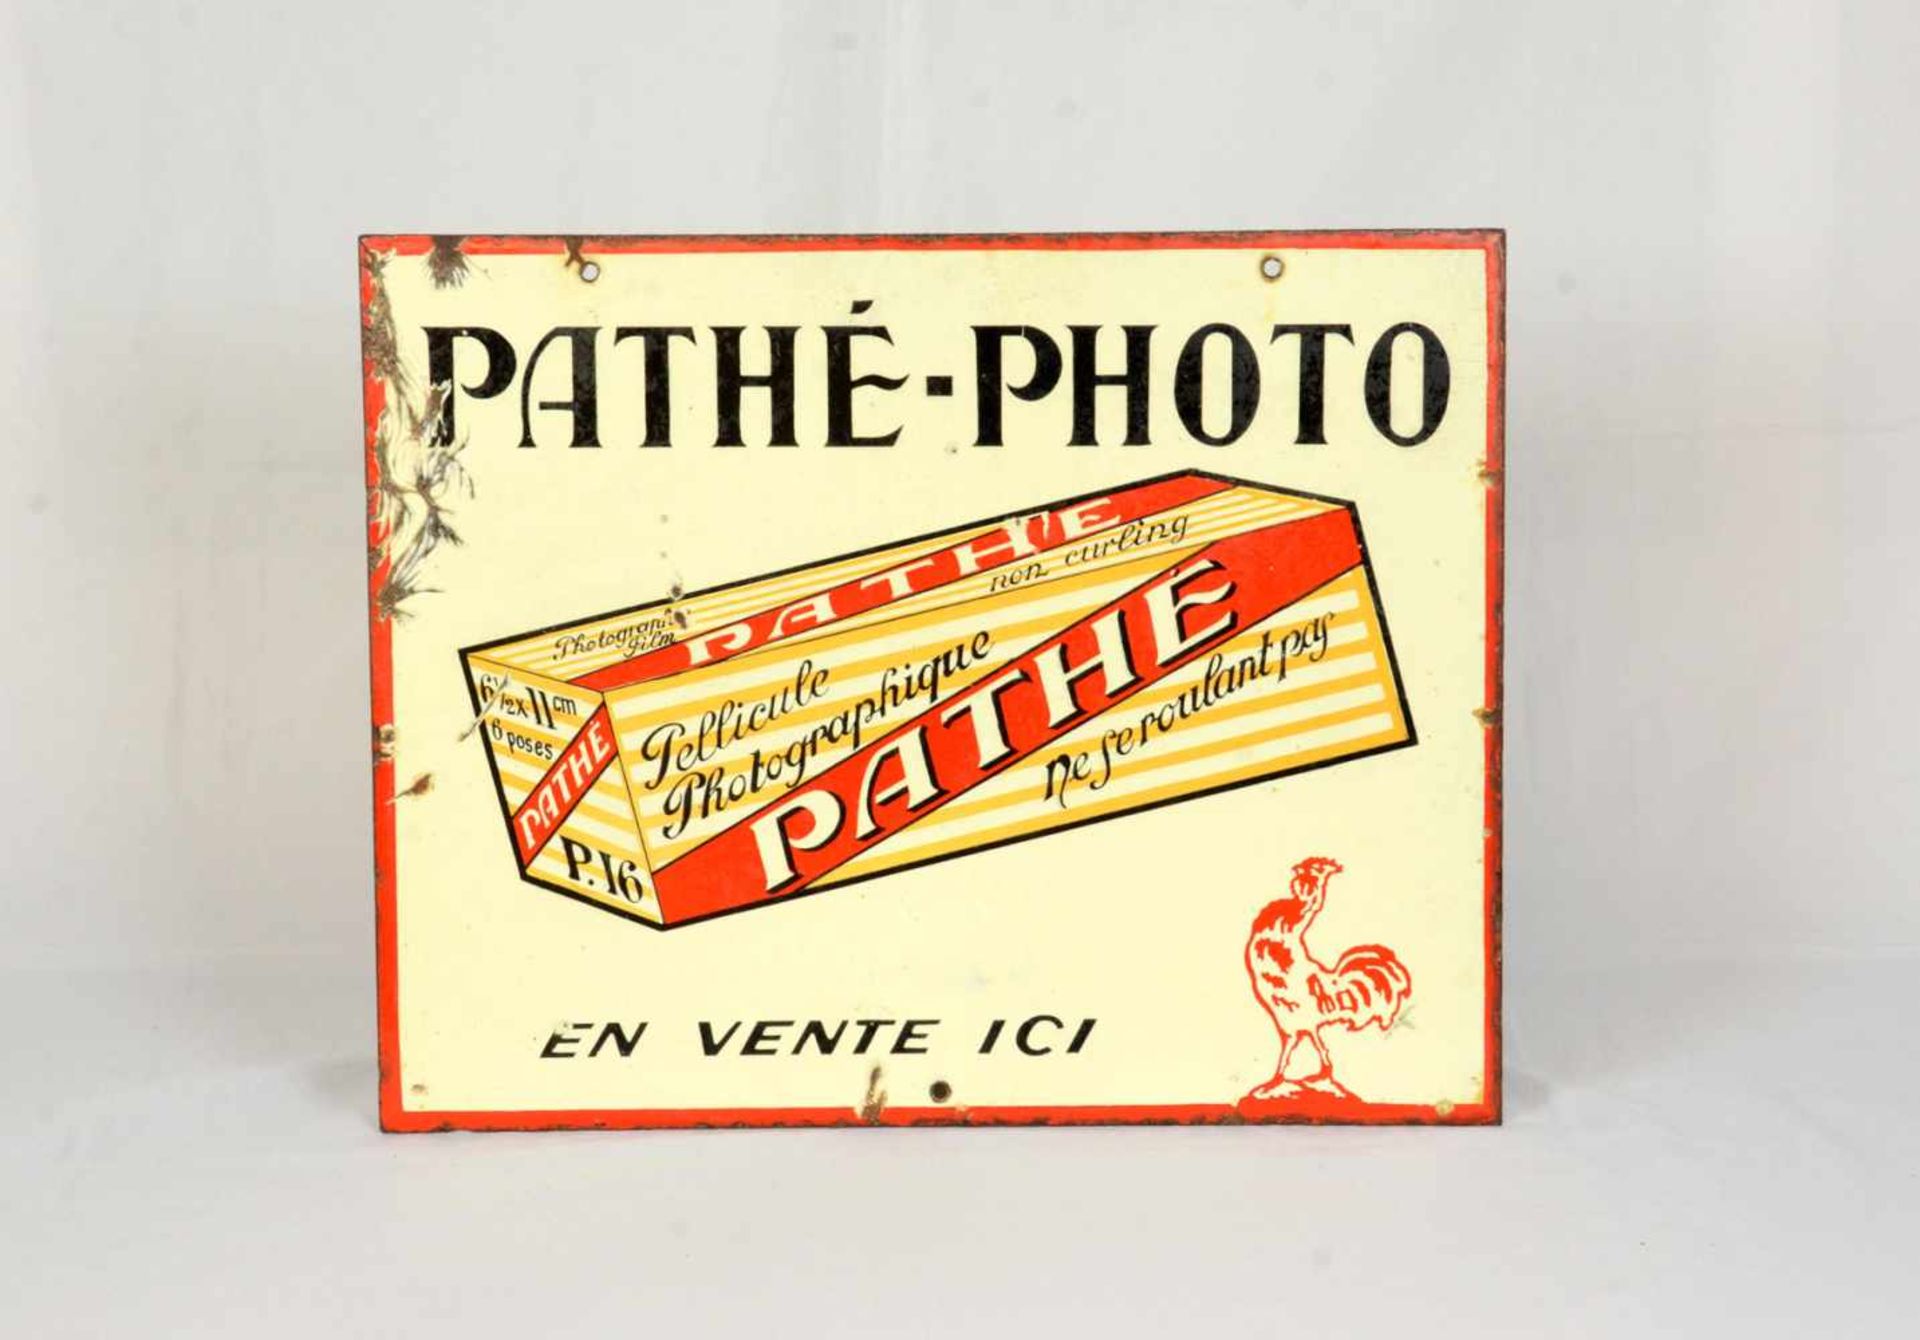 Two-sided enamel sign Pathé-PhotoThis two-sided Pathé-Photo enamel sign is in French, has 3 mounting